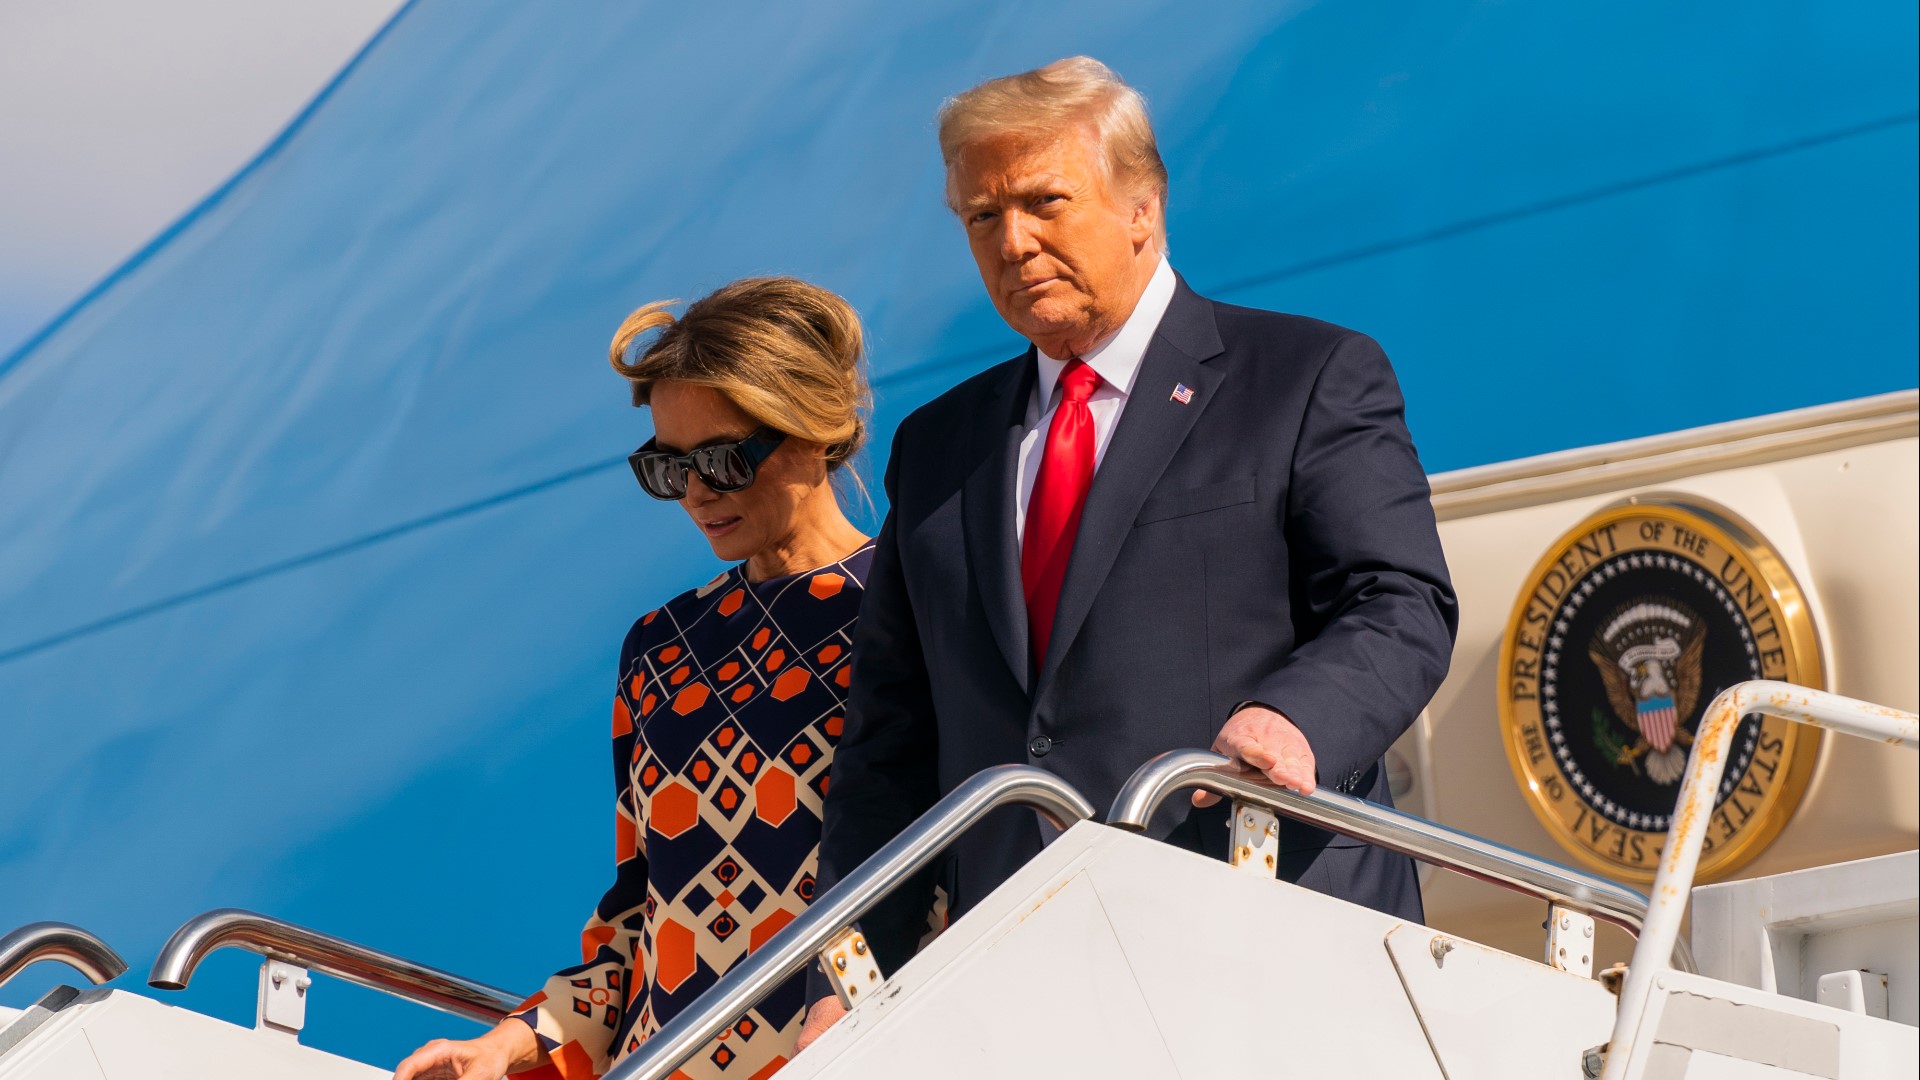 Donald Trump chose not to attend President Joe Biden's Inauguration. Instead, he took an early flight from D.C. to Florida.